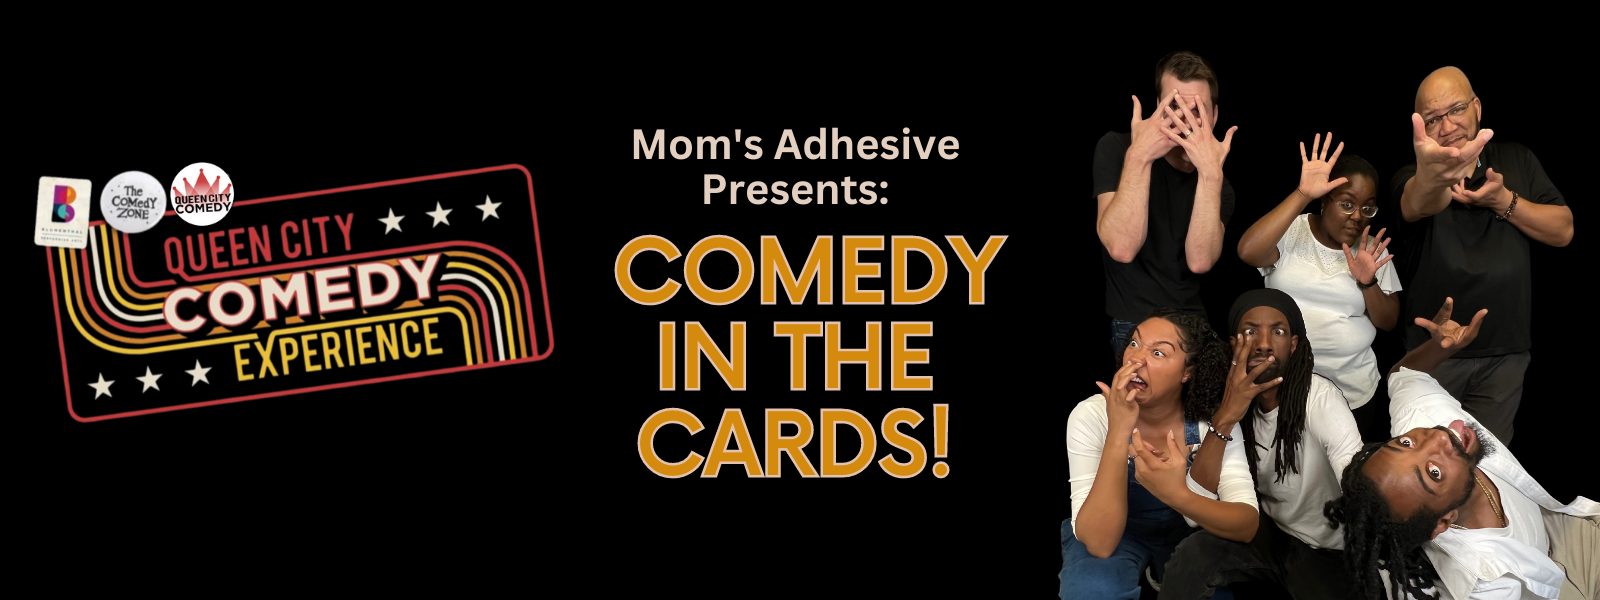 Mom's Adhesive Presents: Comedy in the Cards 